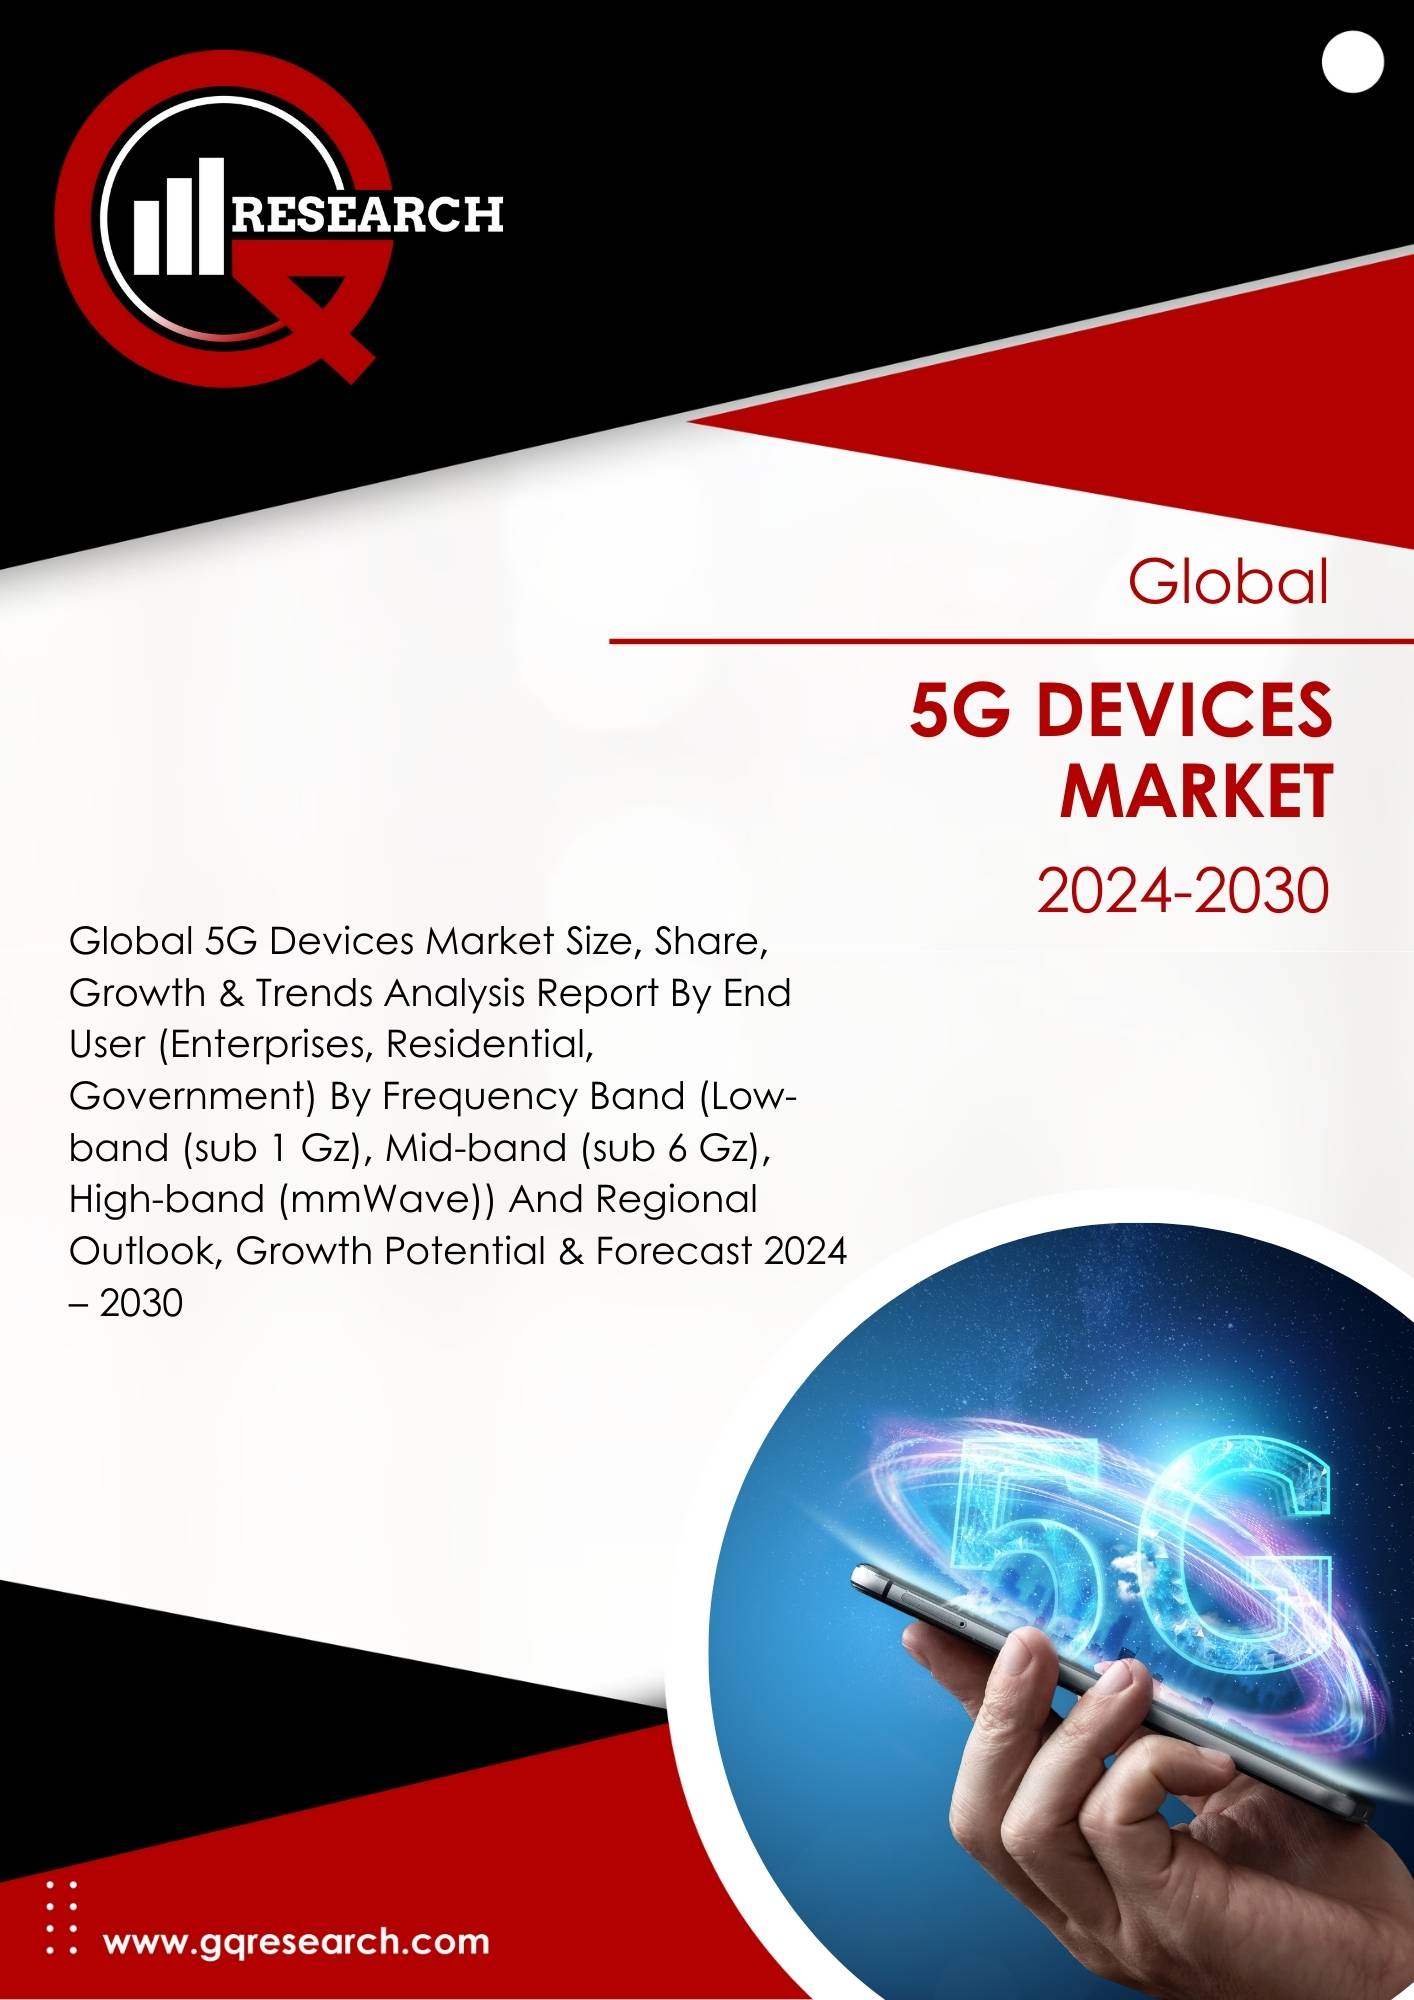 5G Devices Market Size, Share, Growth and Forecast to 2030 | GQ Research